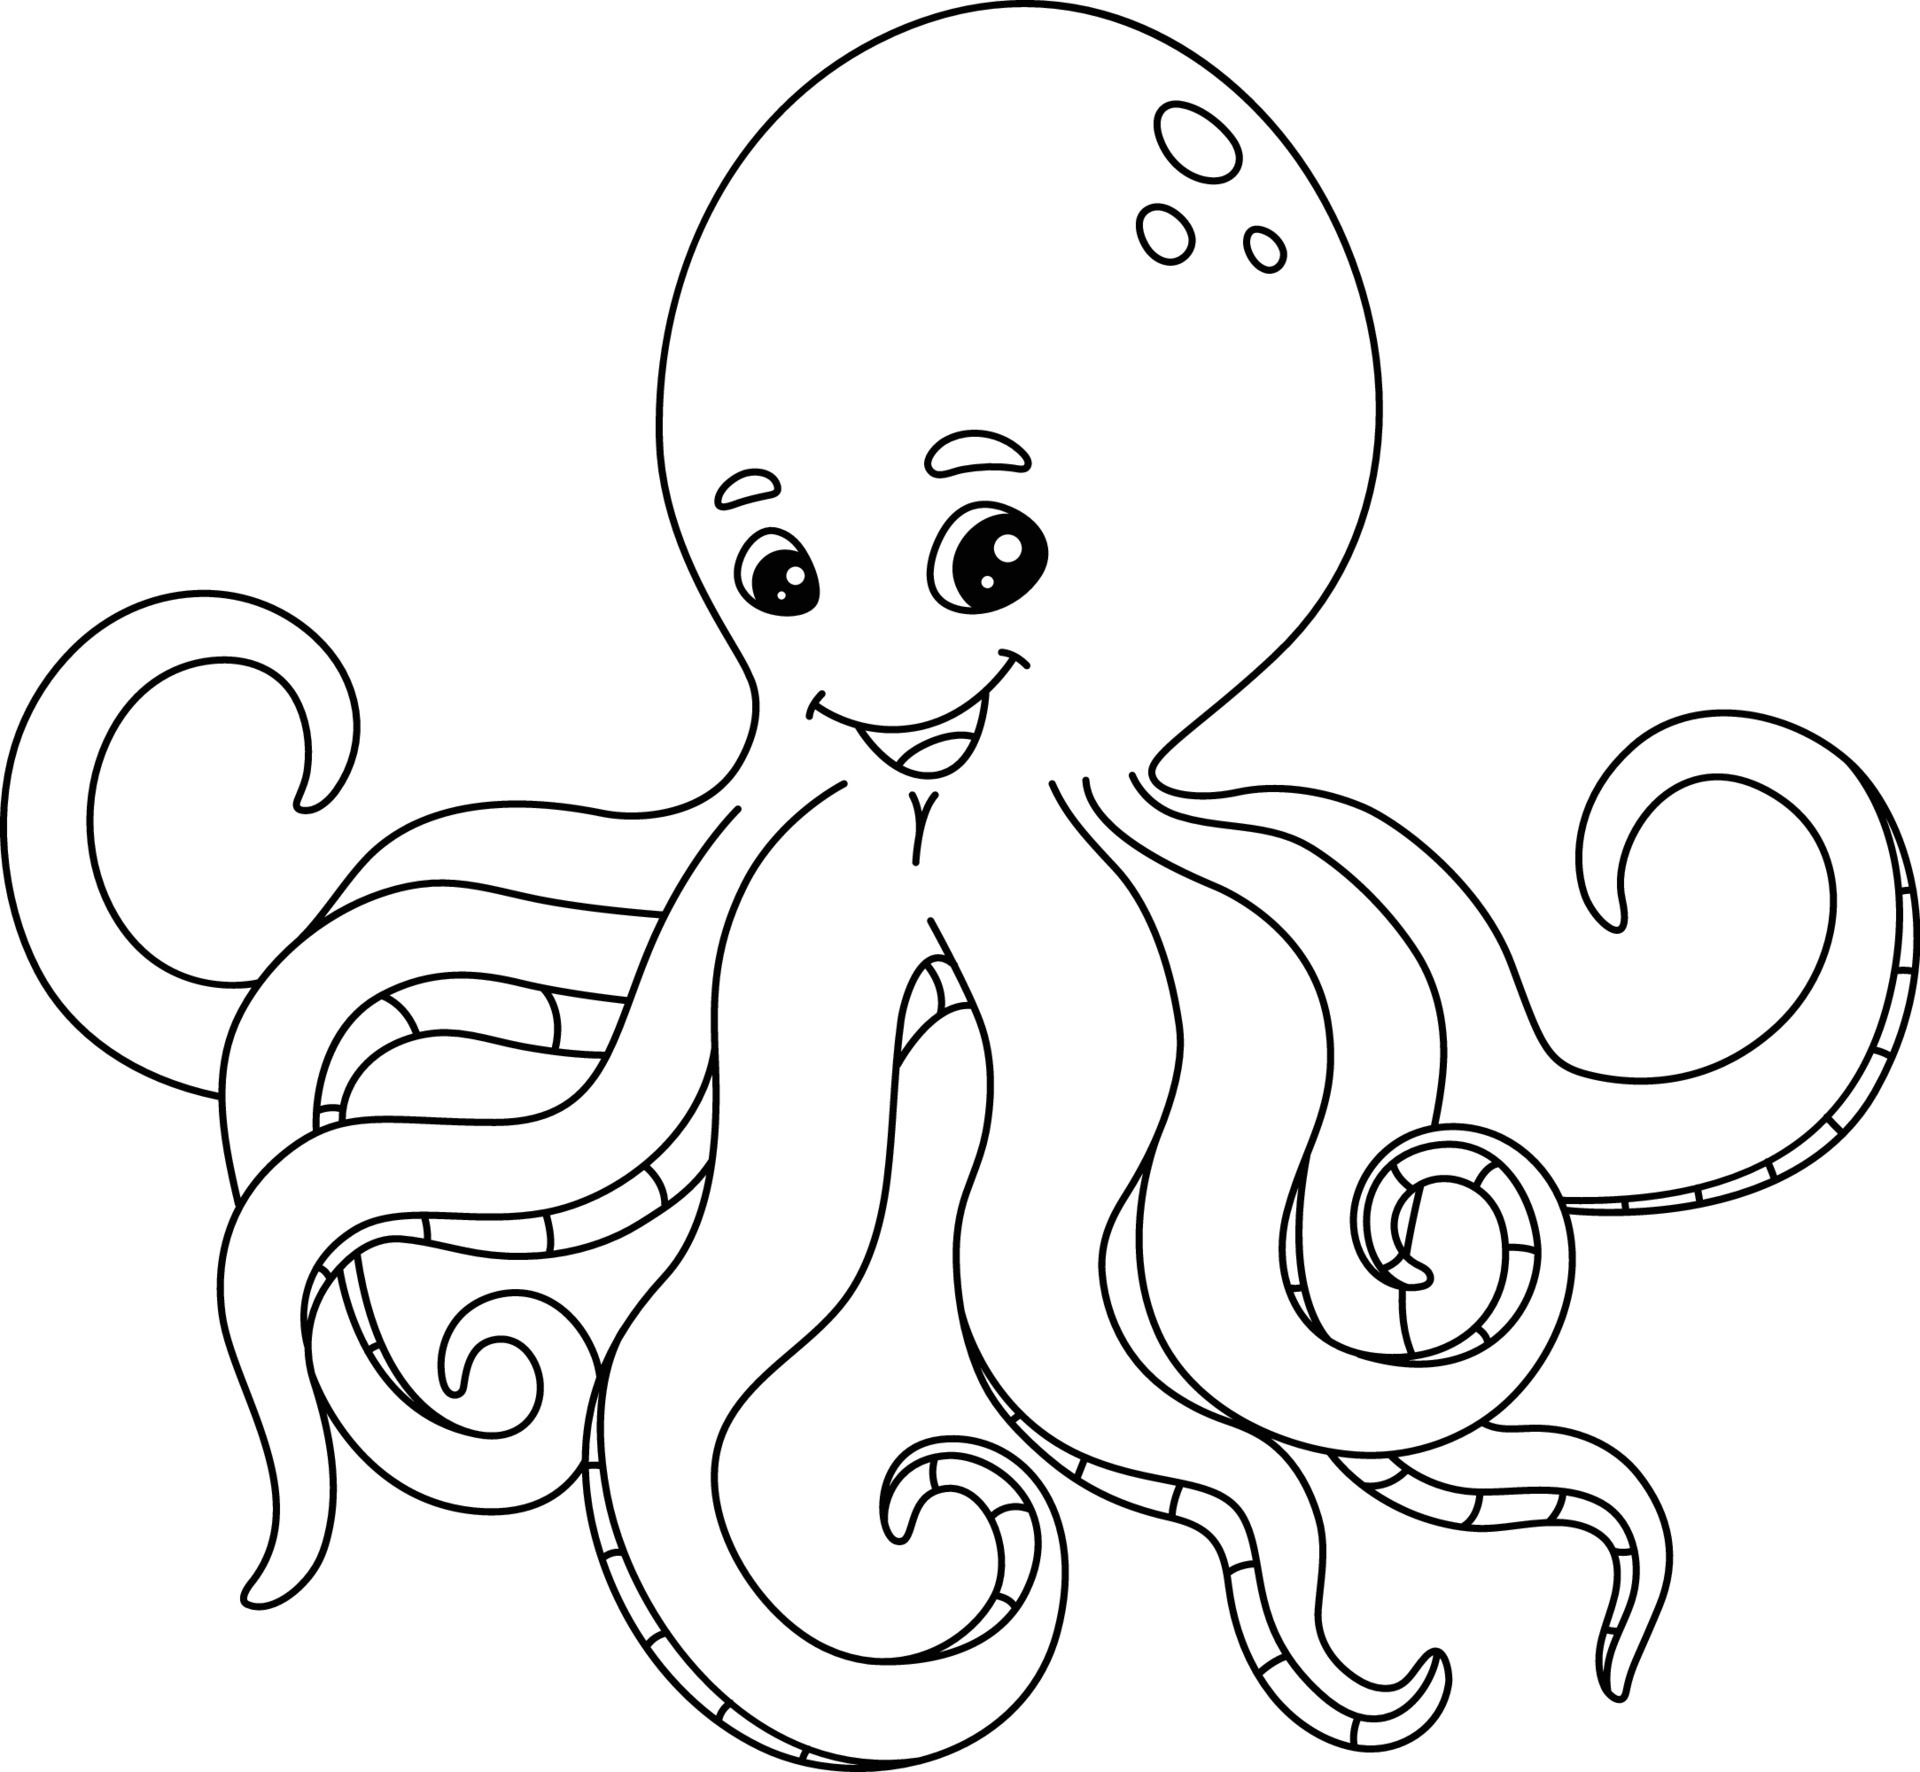 Glitter octopus coloring book for 3-4 year olds